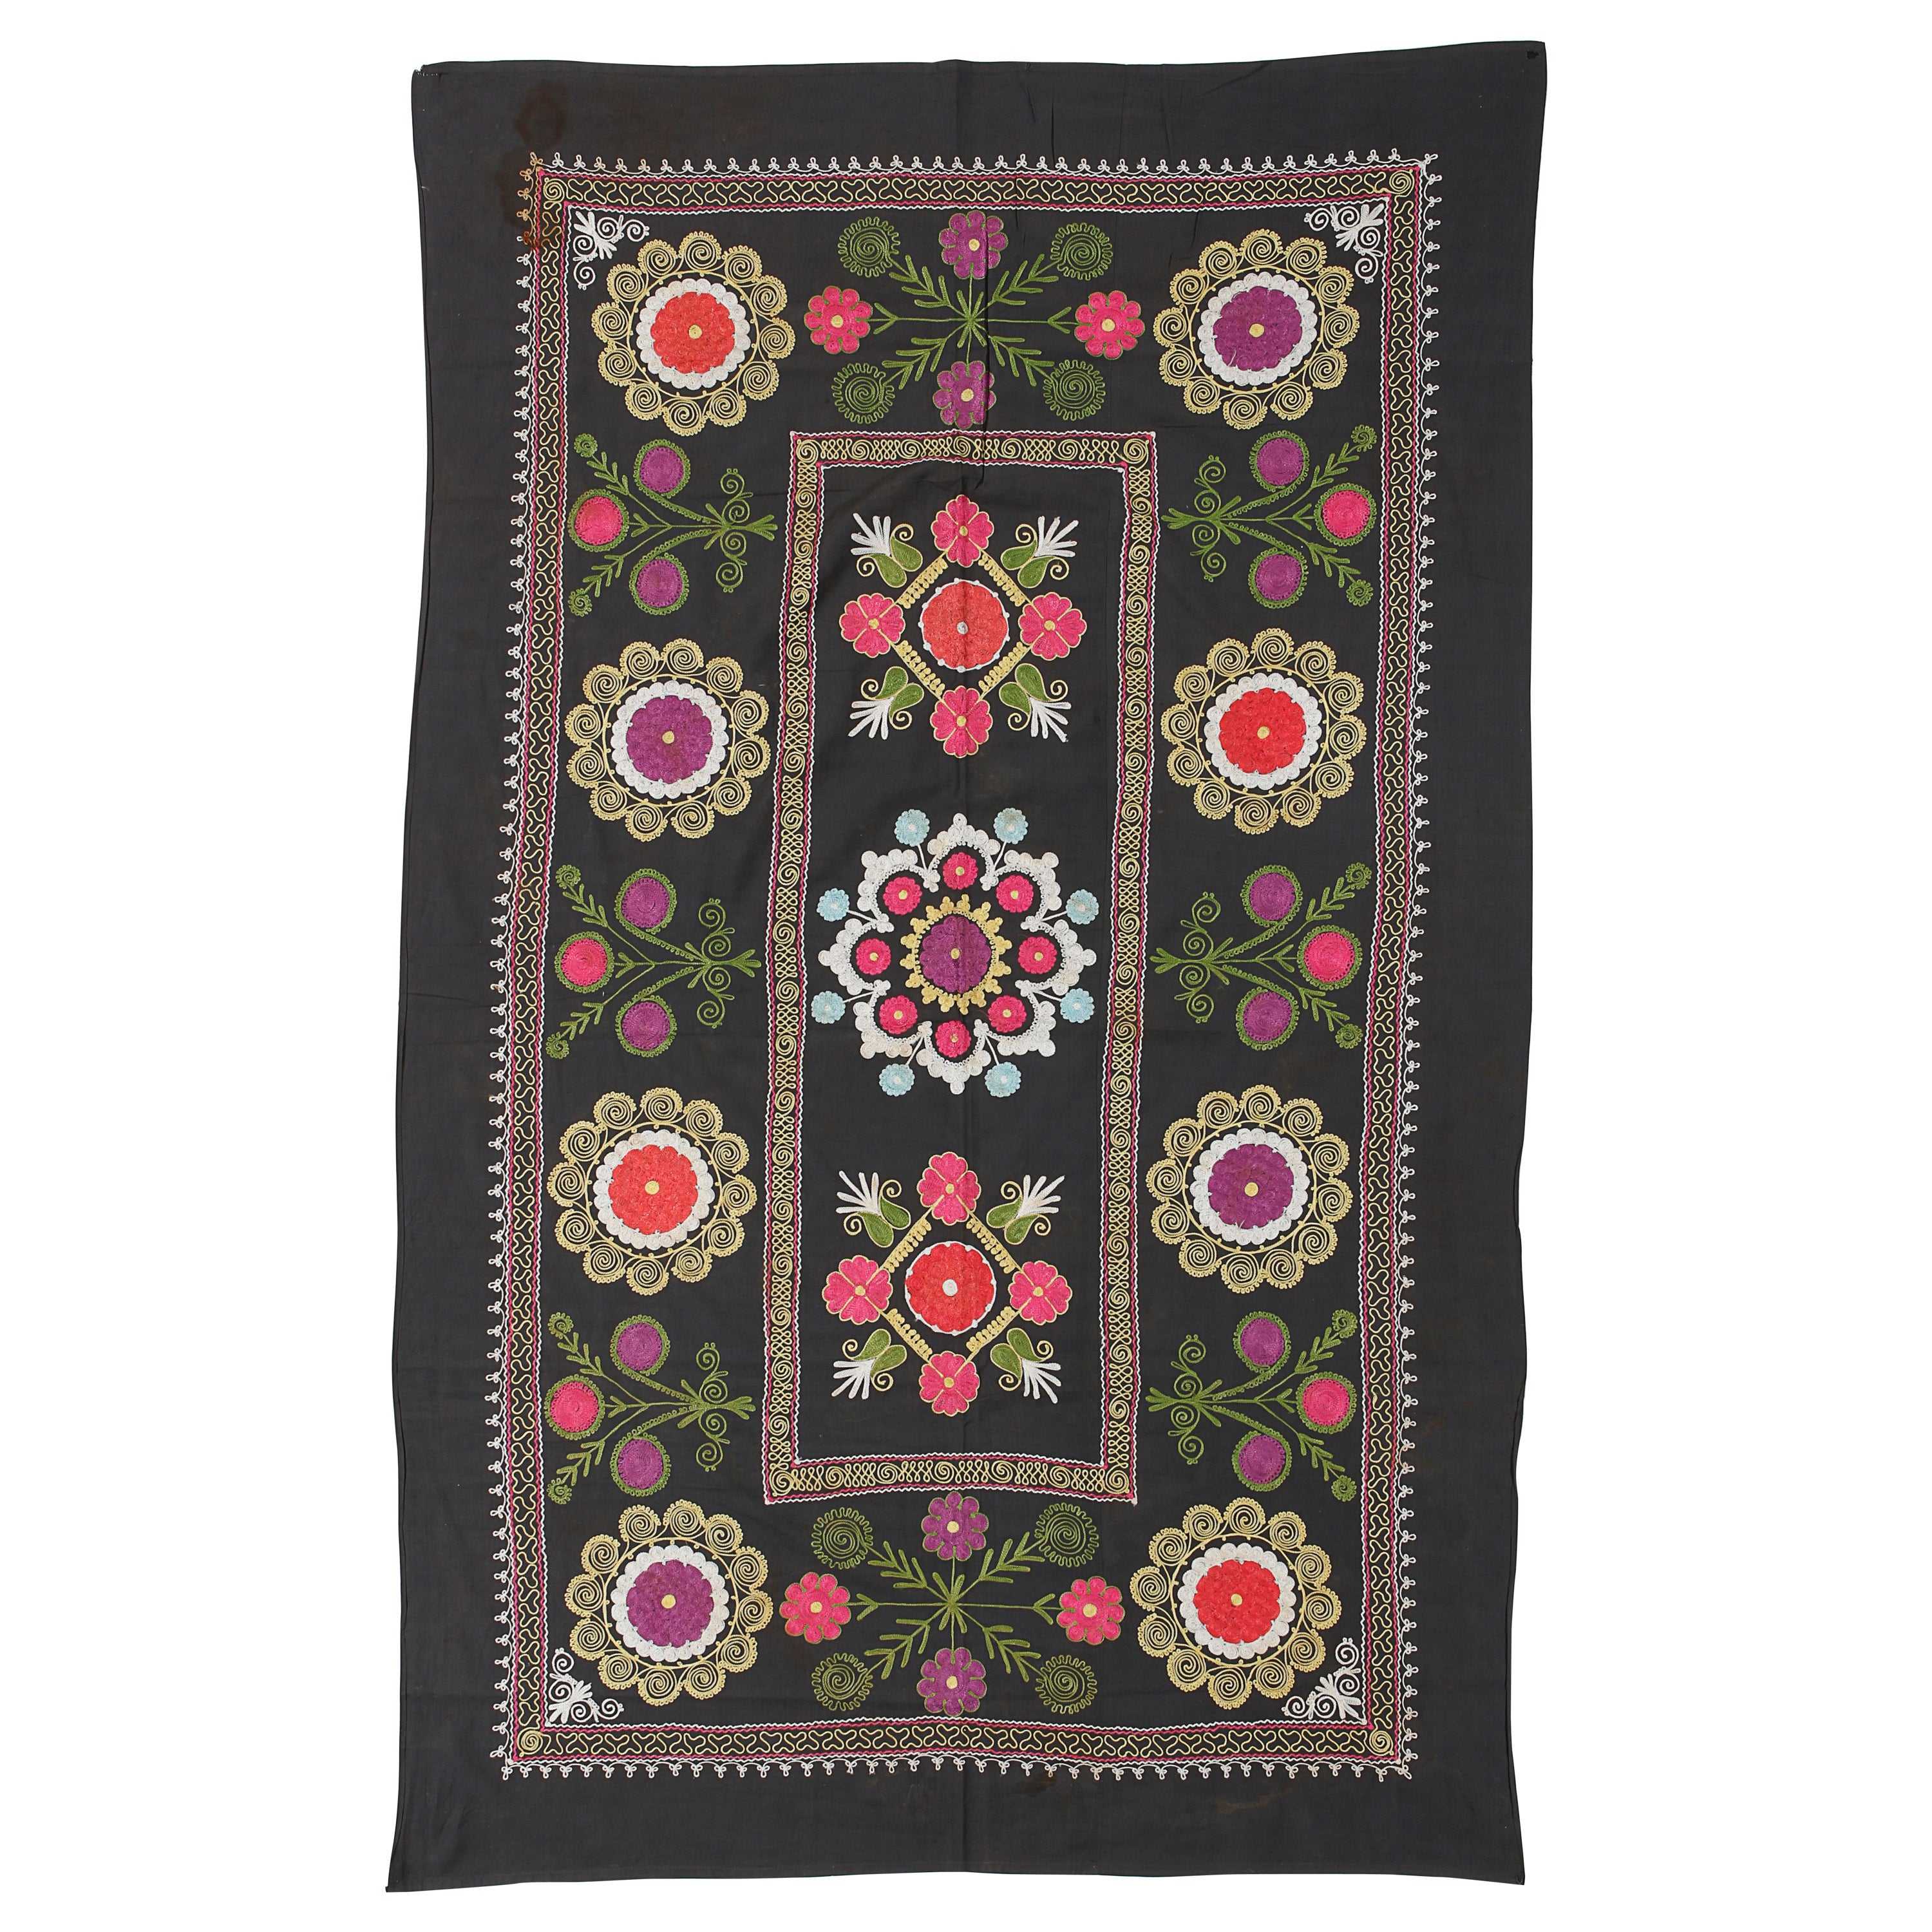 4x6.3 Ft Uzbek Silk Embroidery Wall Hanging, Vintage Suzani Bed Cover in Black For Sale